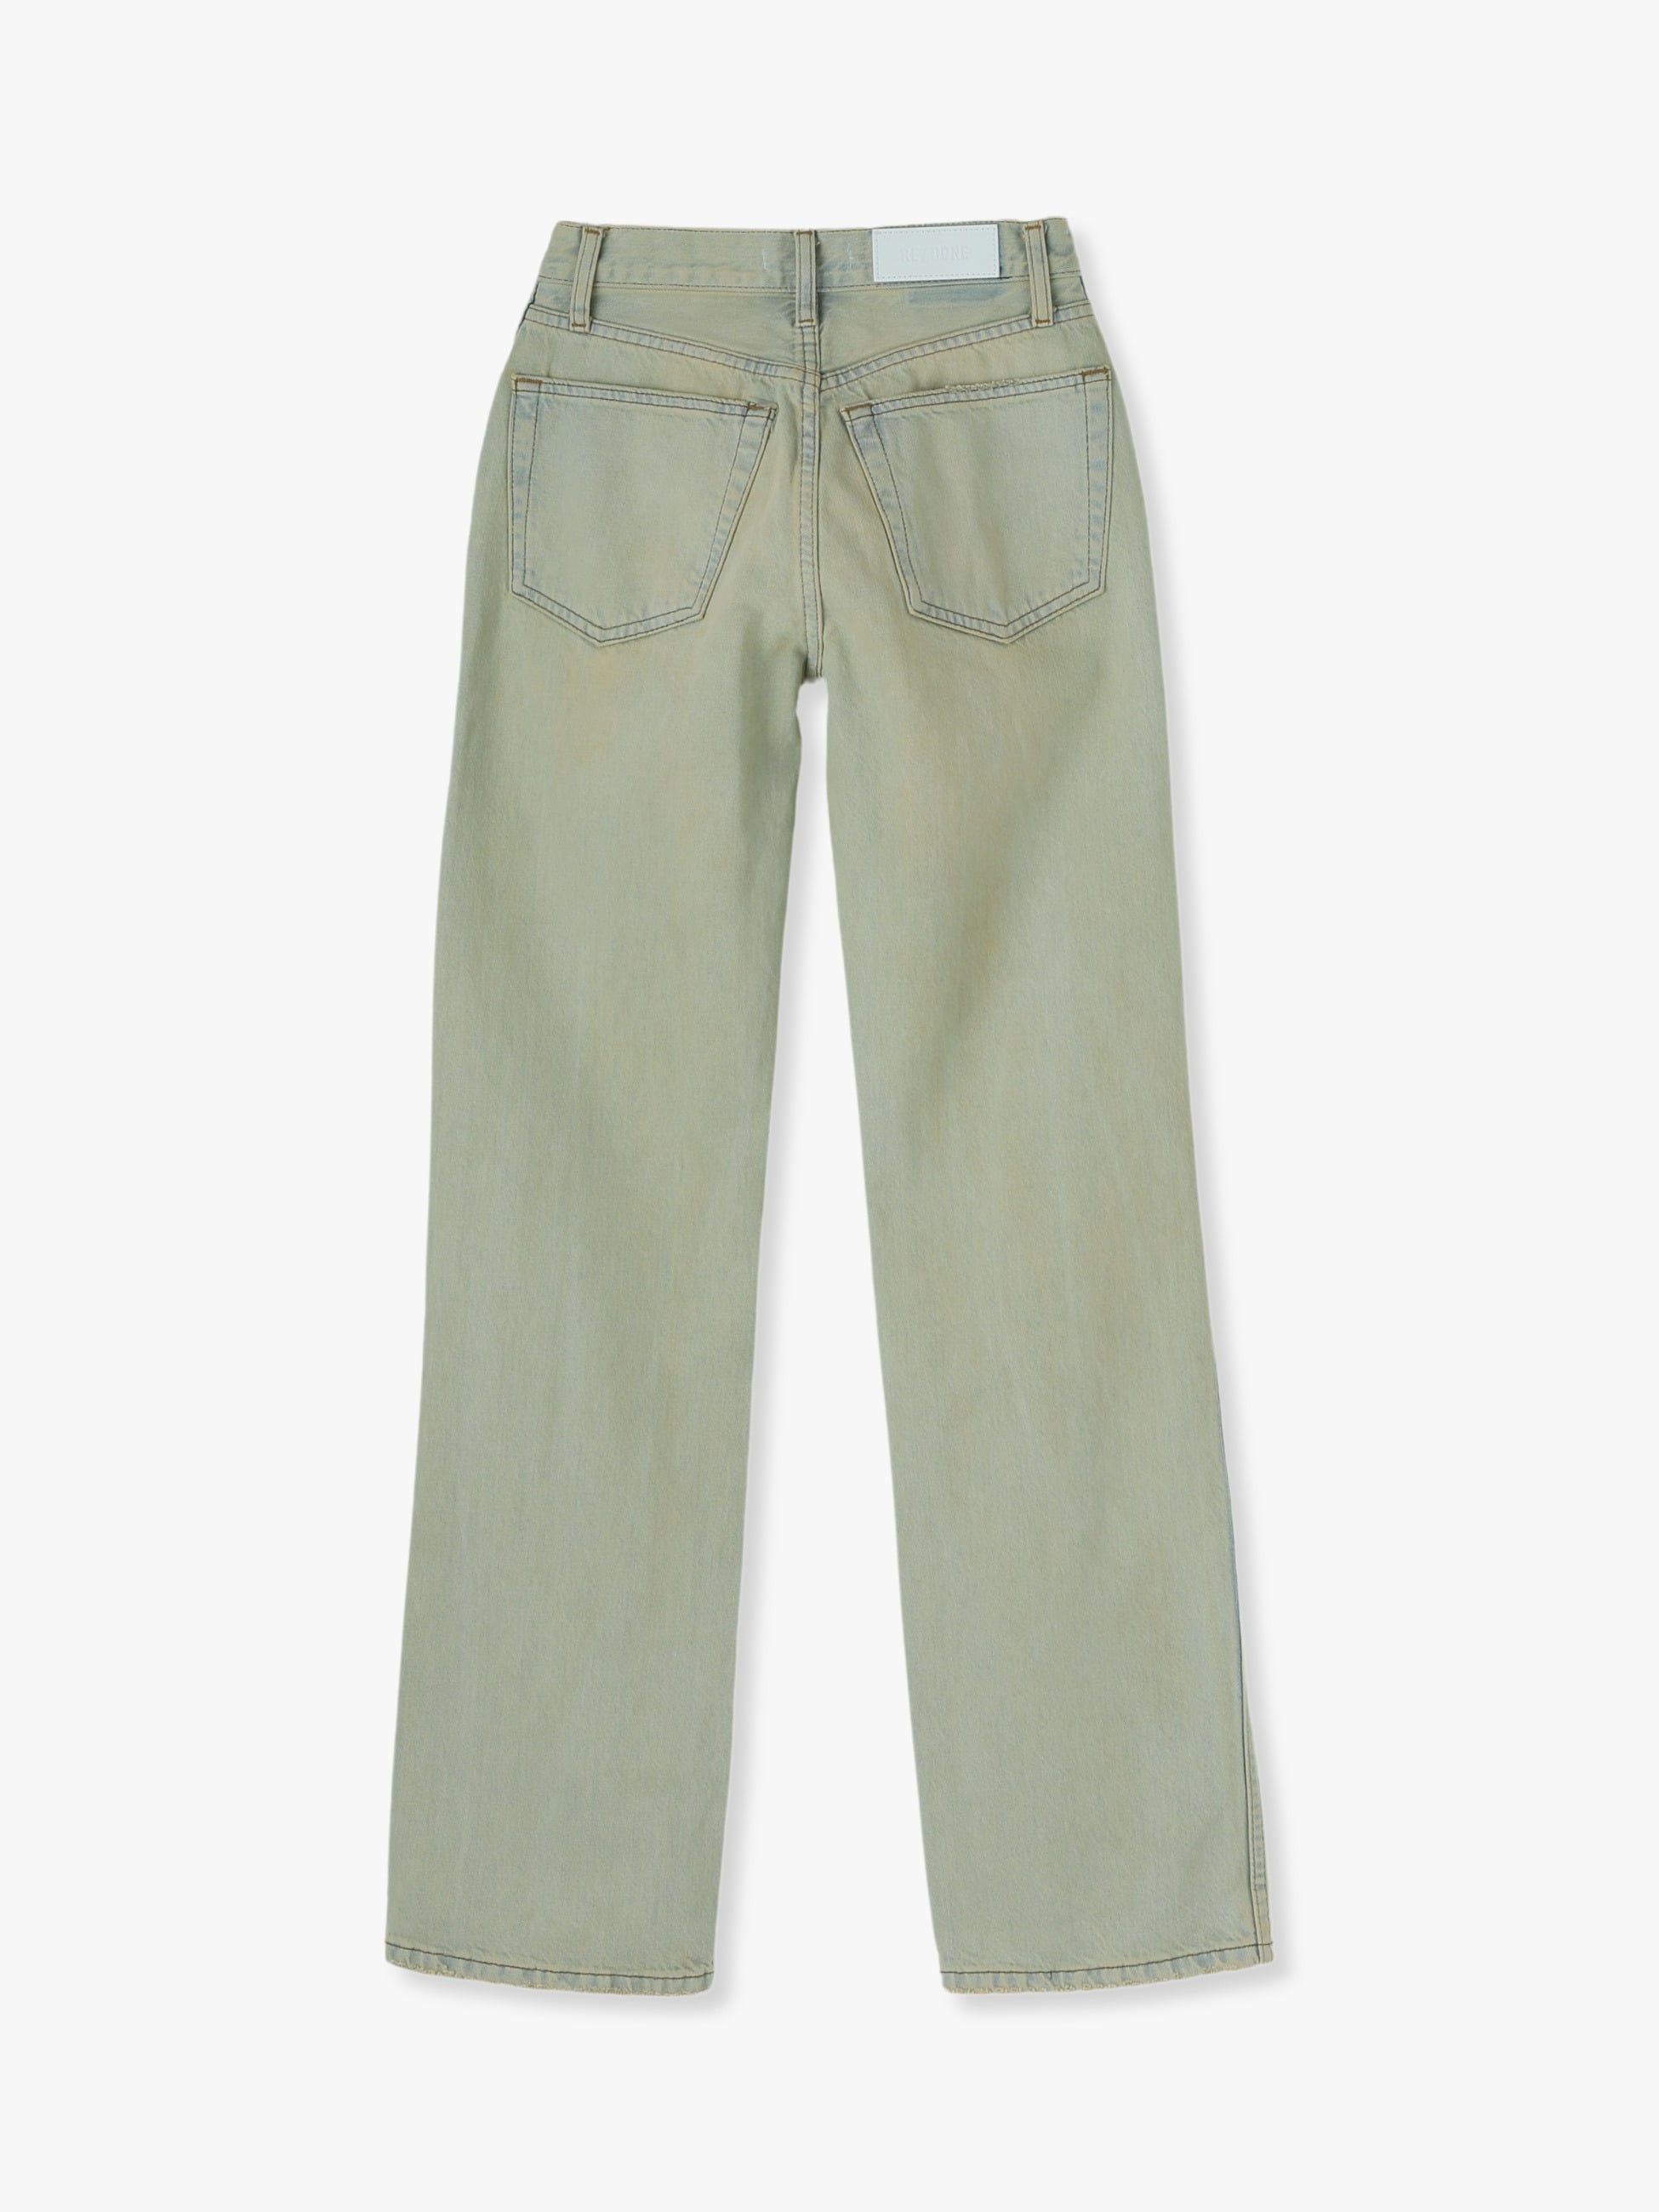 90s High Rise Loose Denim Pants (light blue)｜RE/DONE(リダン)｜Ron 